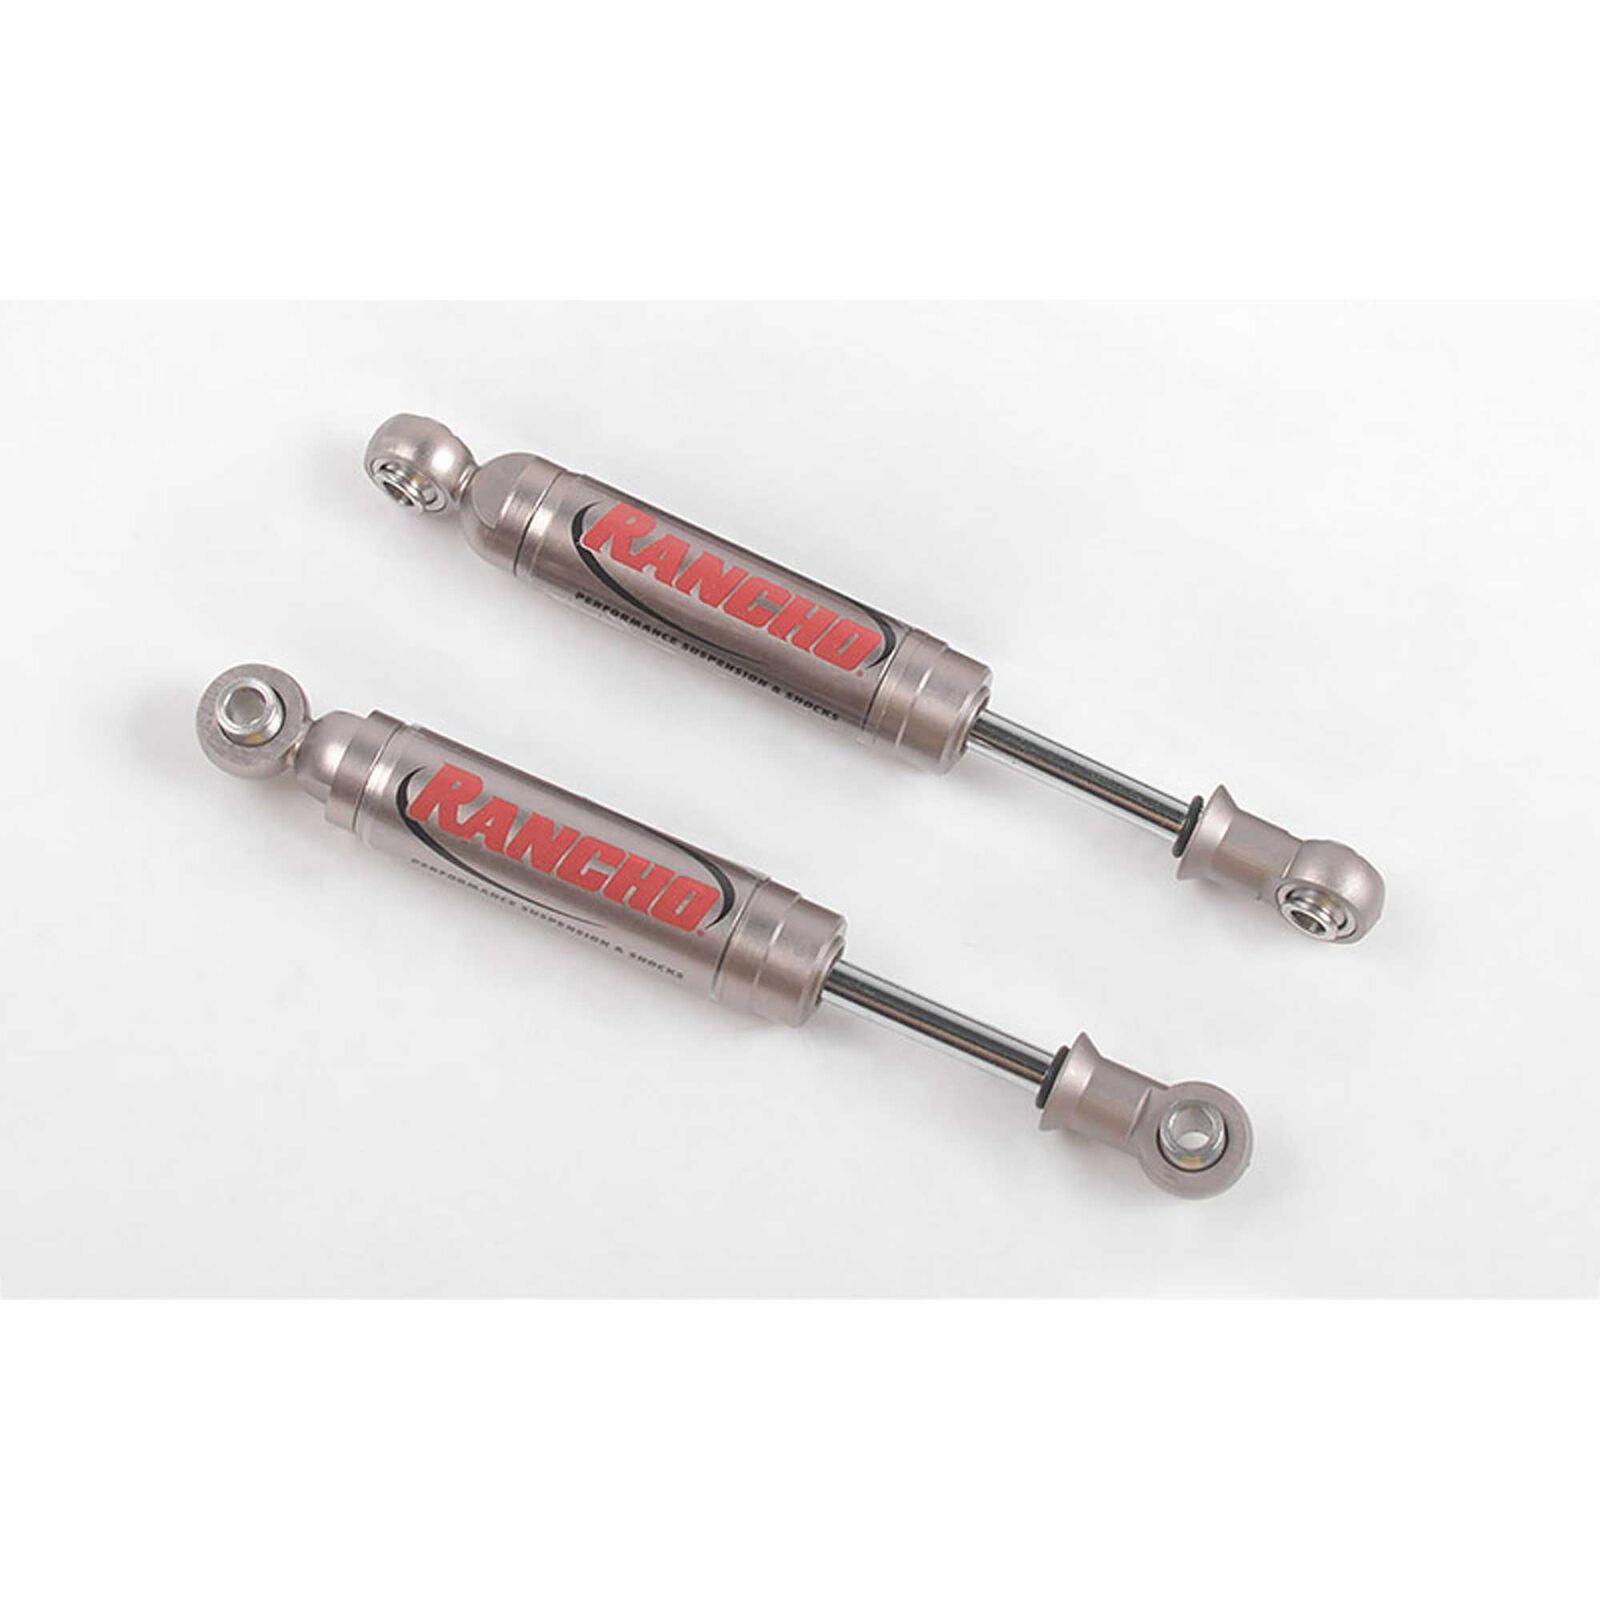 Rancho RS9000 XL Shock Absorbers, 80mm